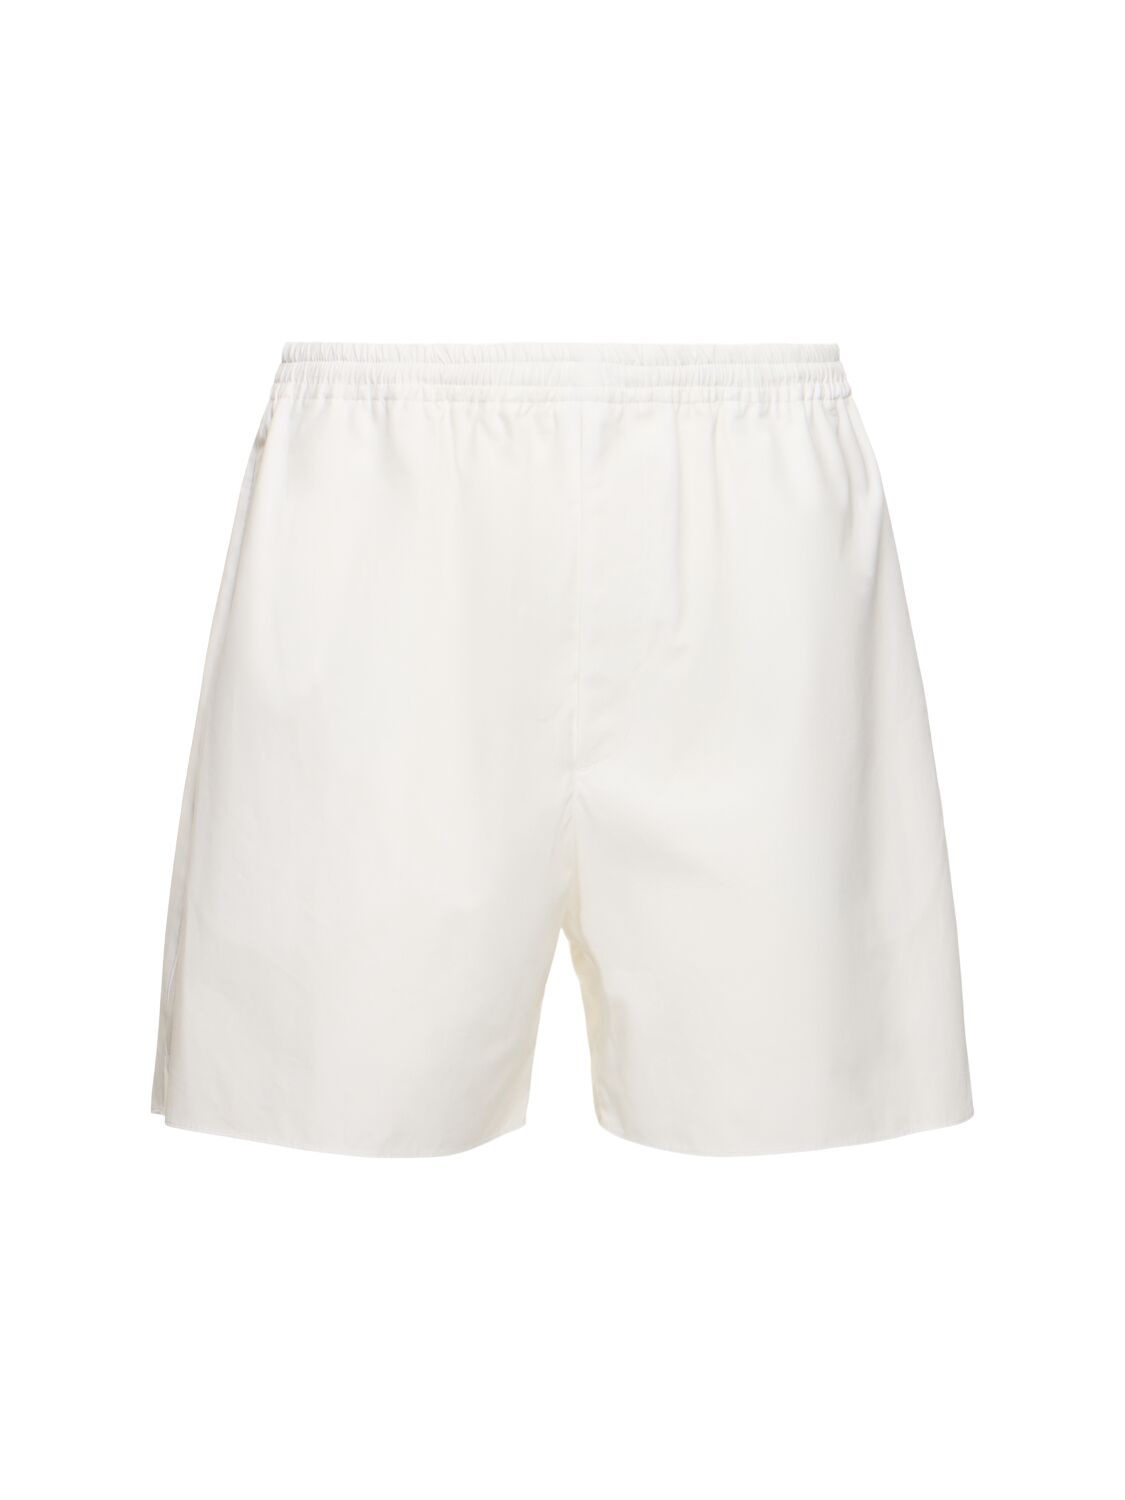 Wide Cotton Oxford Shorts